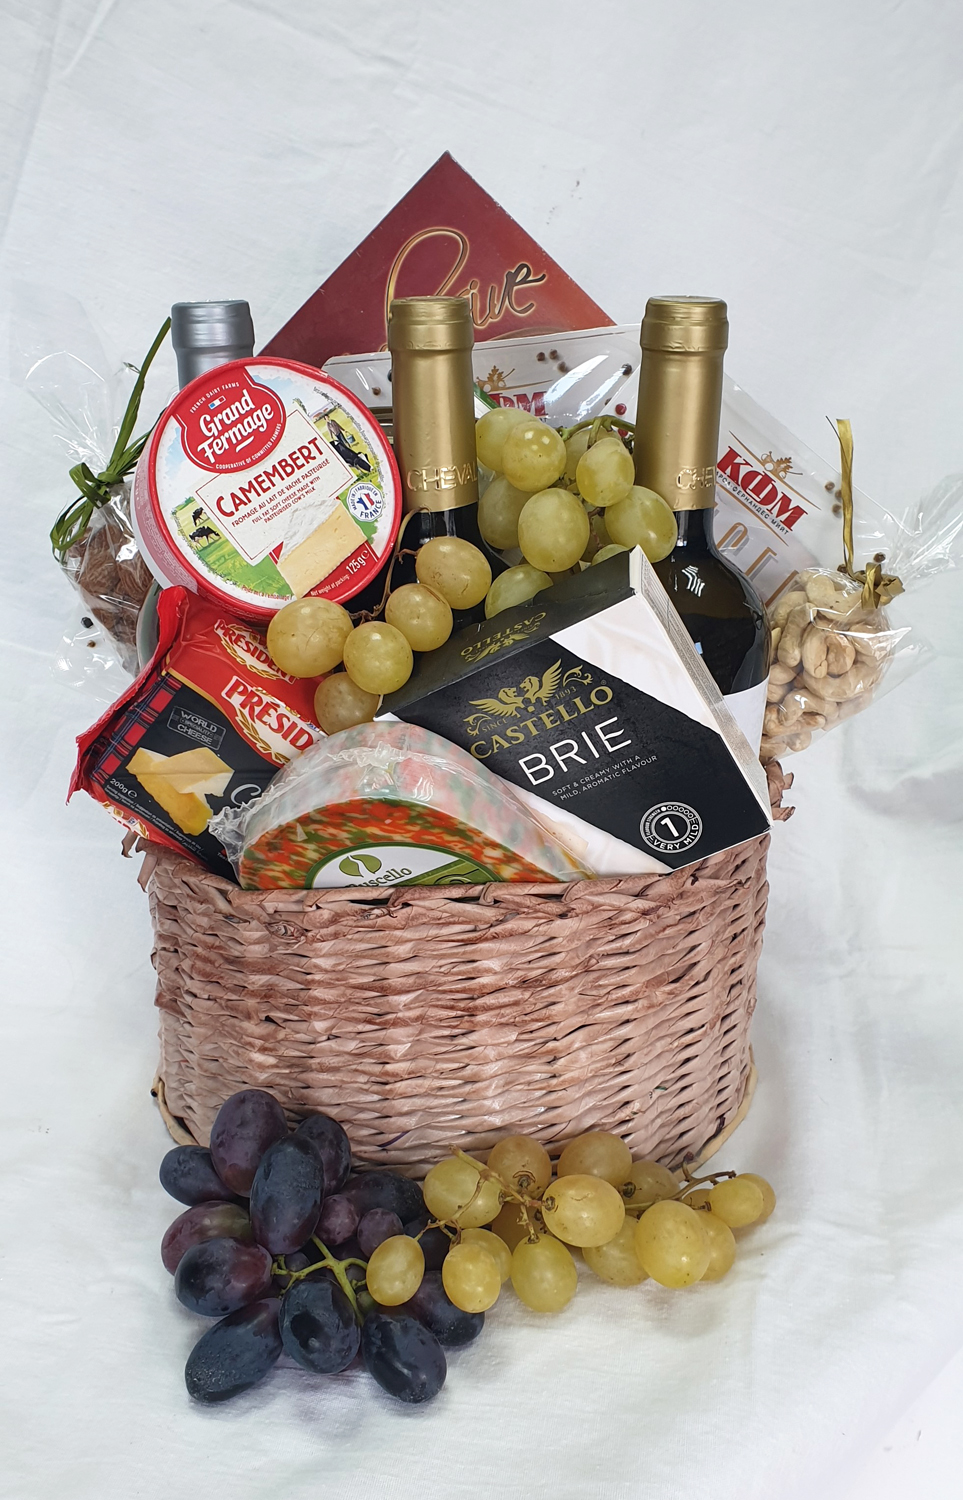 A luxury basket with selected cheeses and high-end wine